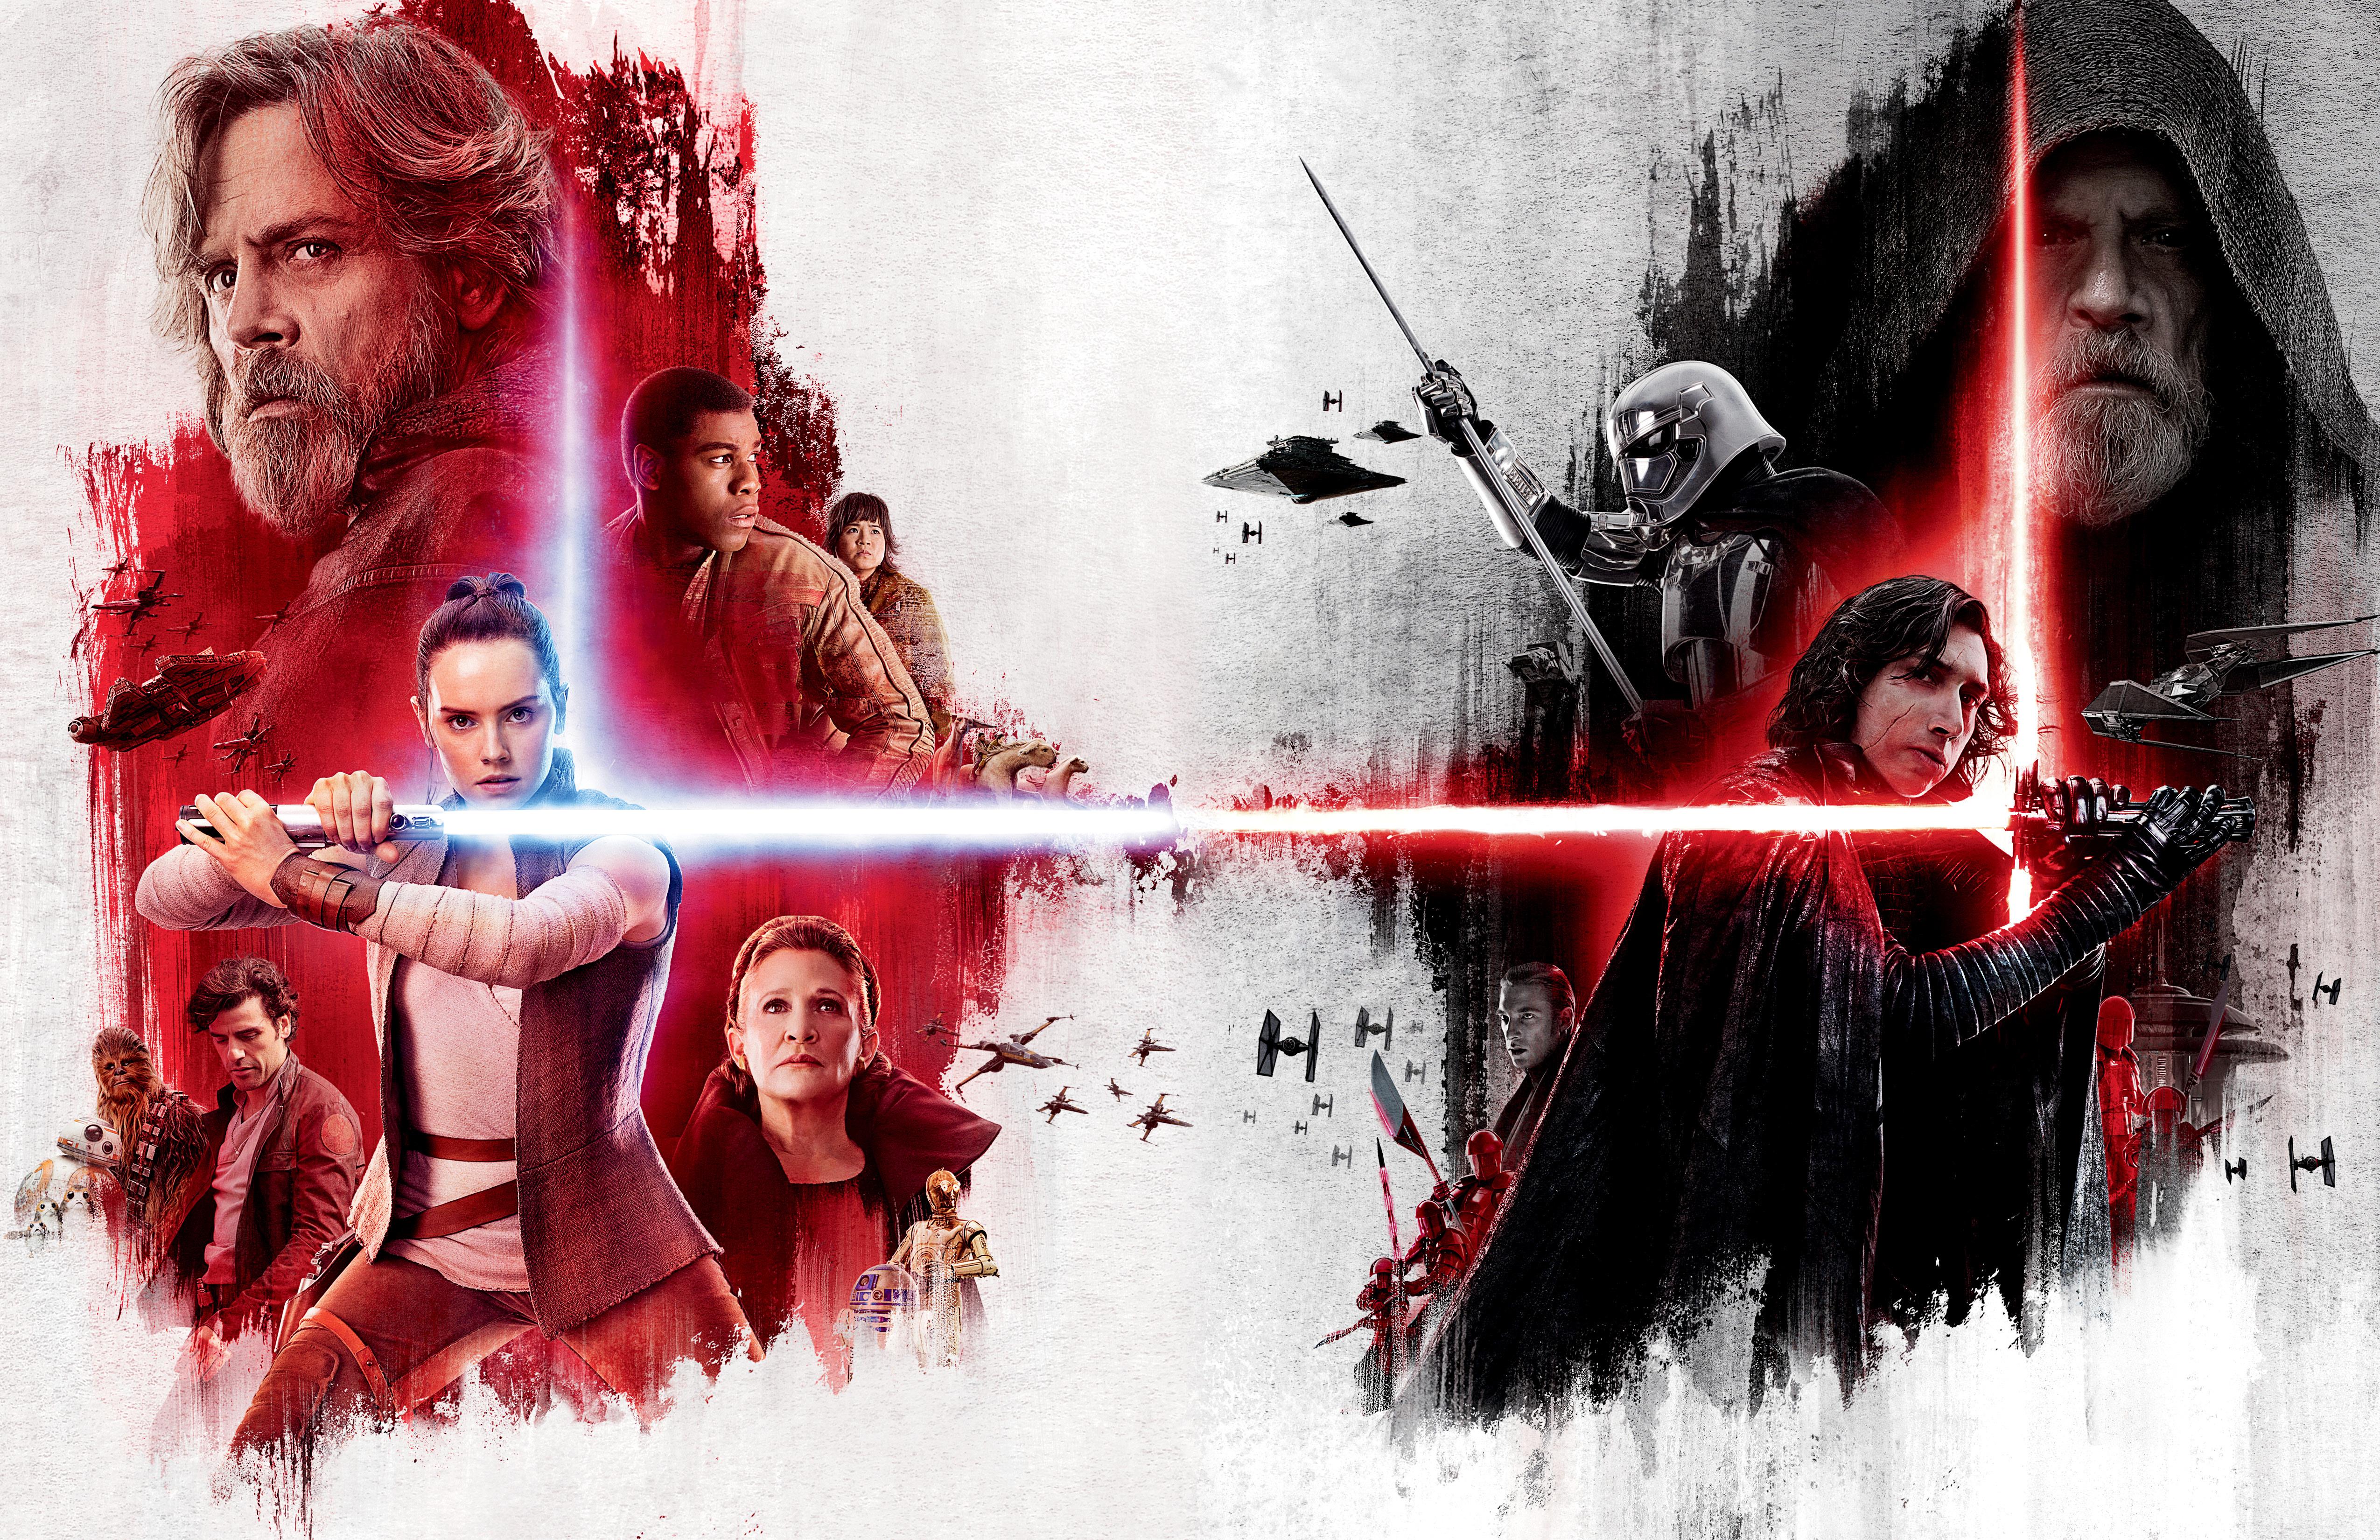 5100 x 3300 · jpeg - Star Wars The Last Jedi Poster, HD Movies, 4k Wallpapers, Images ...